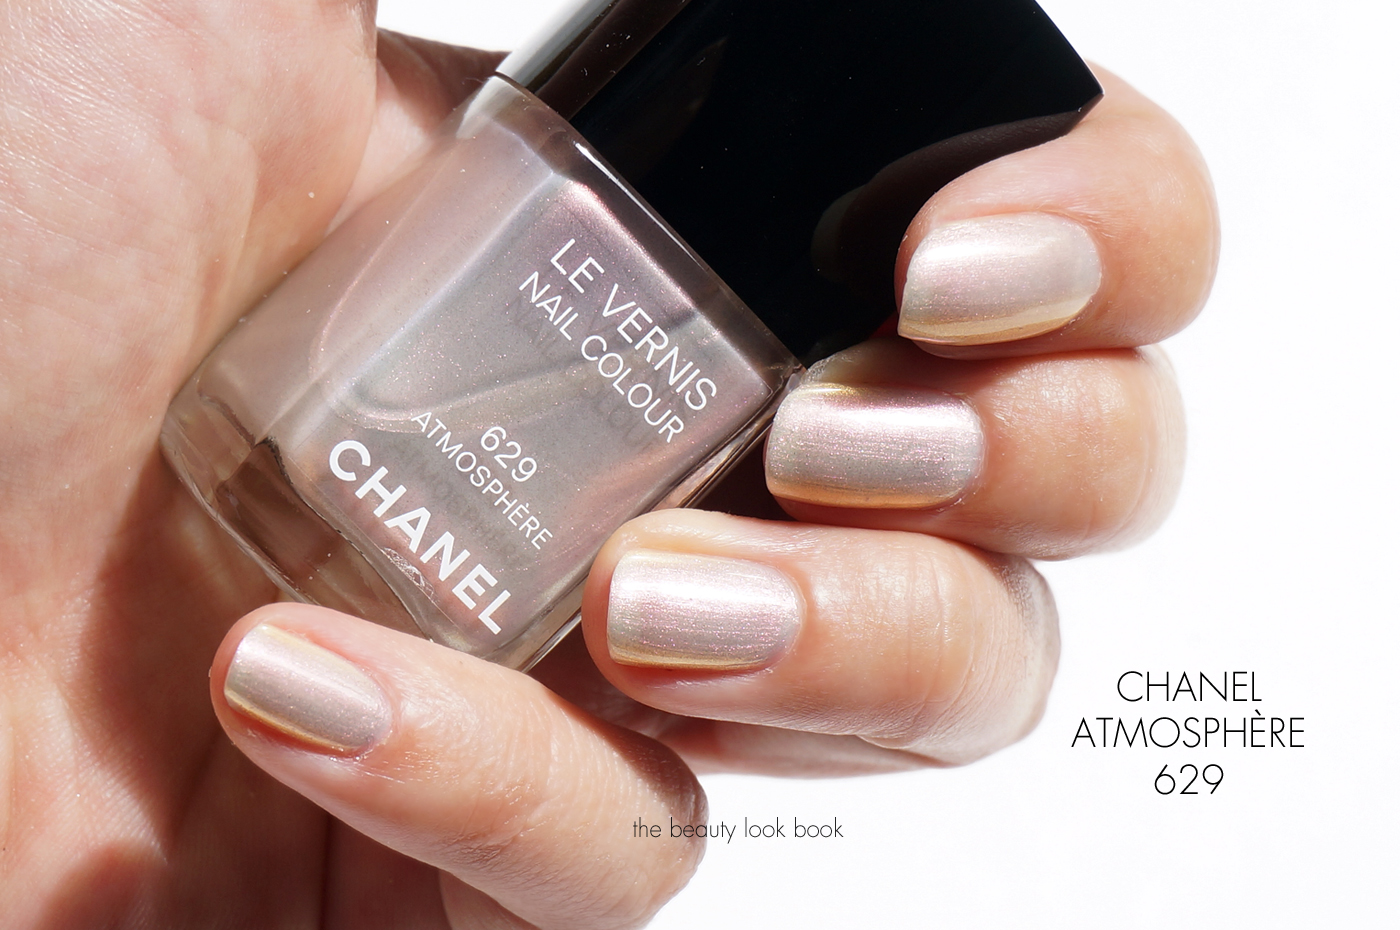 Chanel Atmosphere Le Vernis Nail Polish : Review, Swatches and